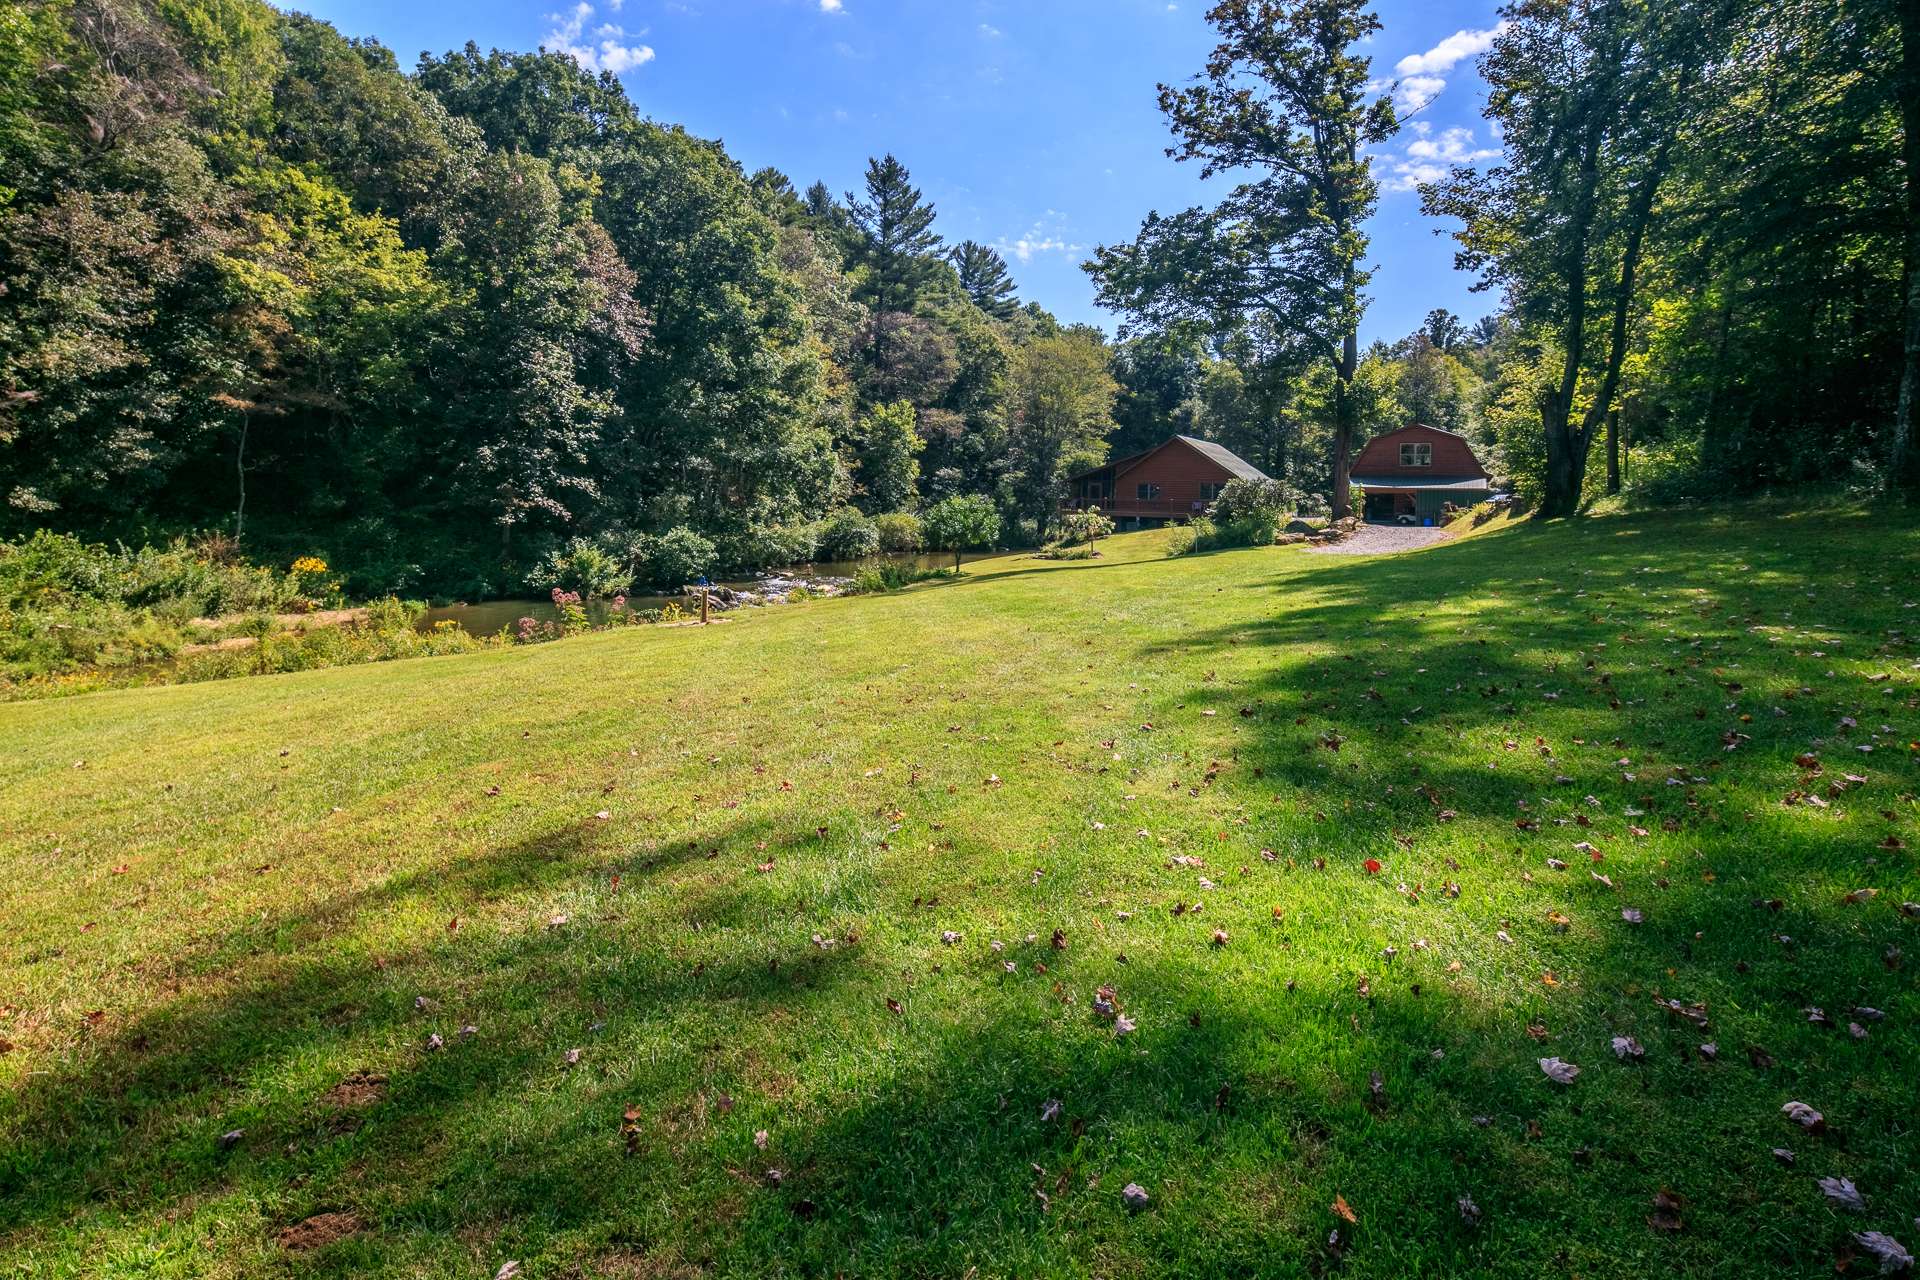 This serene mountain setting is amazing!  Open areas for gardens, orchard, or play, along with peaceful woodlands with a diverse mixture of hardwoods, evergreens, and native mountain foliage.